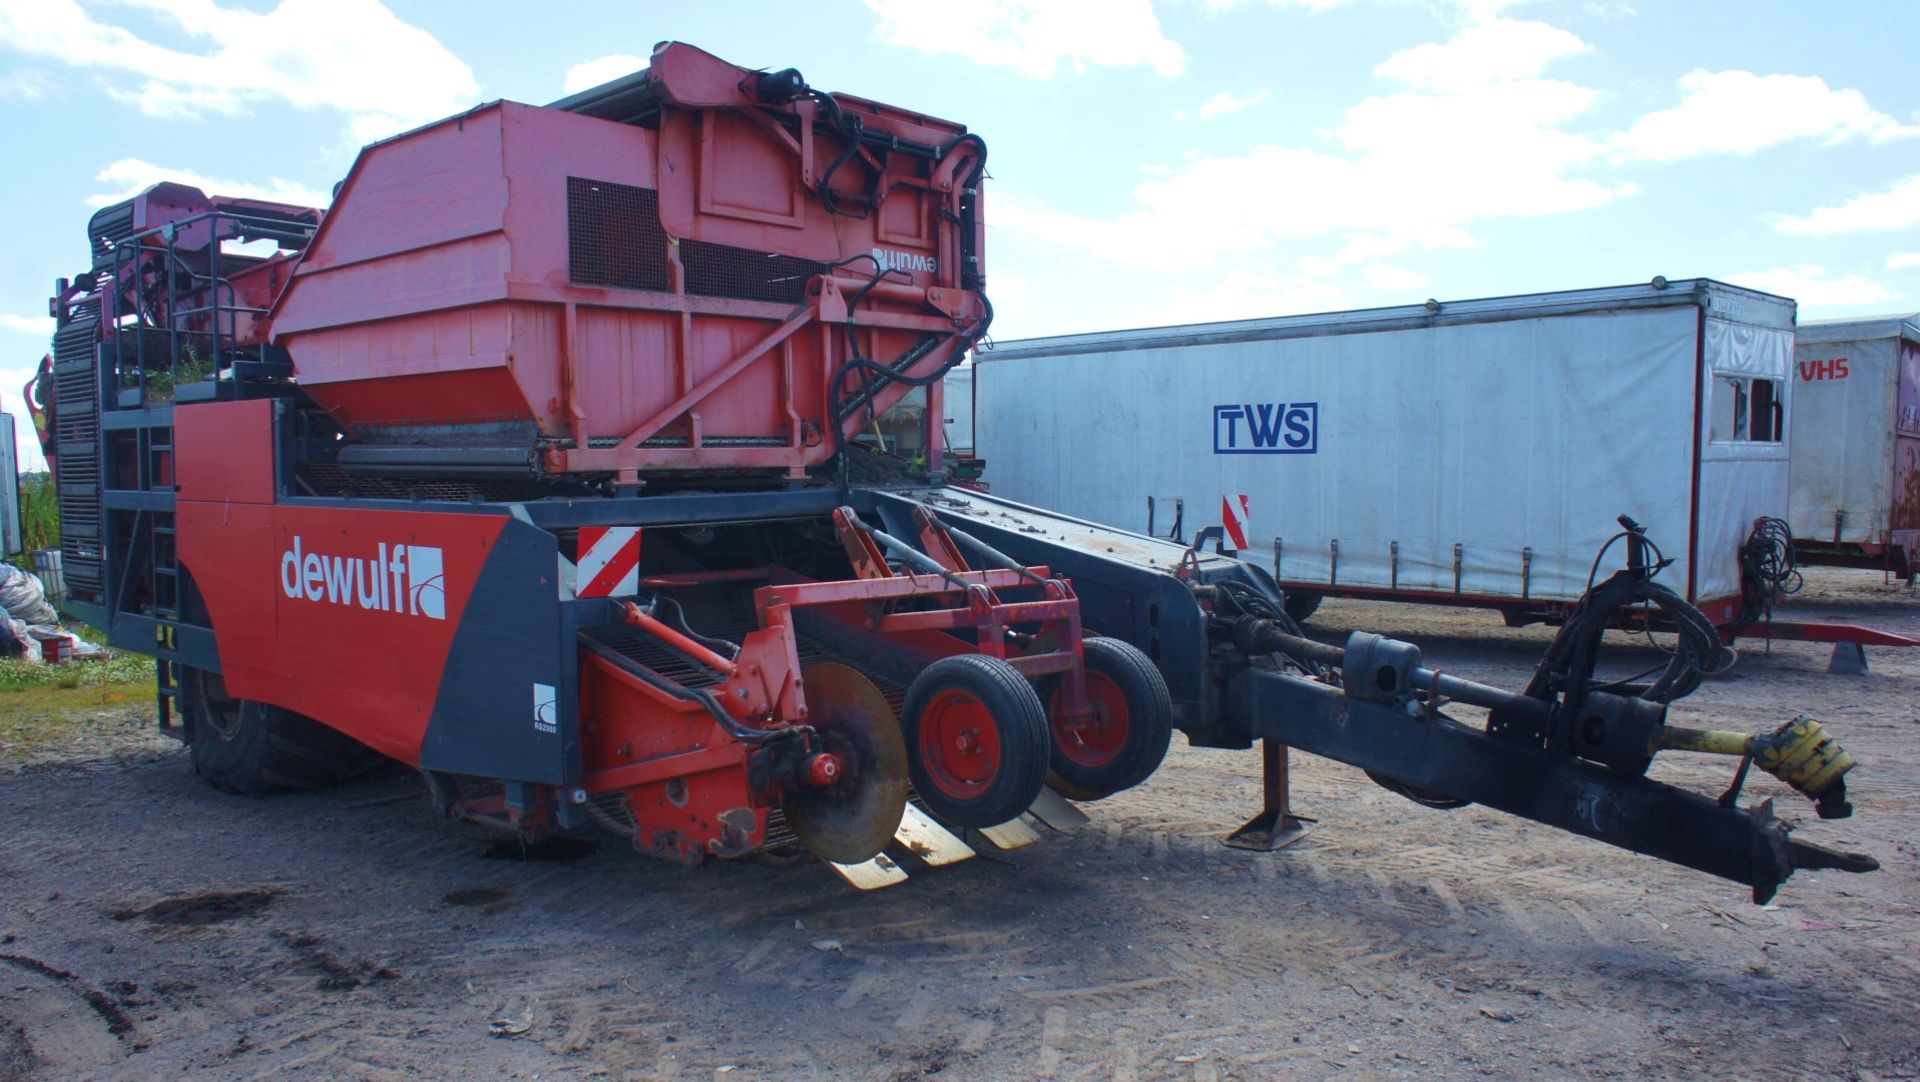 Dewulf RS2060 Trailed 2-Row Sieving Harvester, Serial Number 5811679, Year 2011 - Image 7 of 10